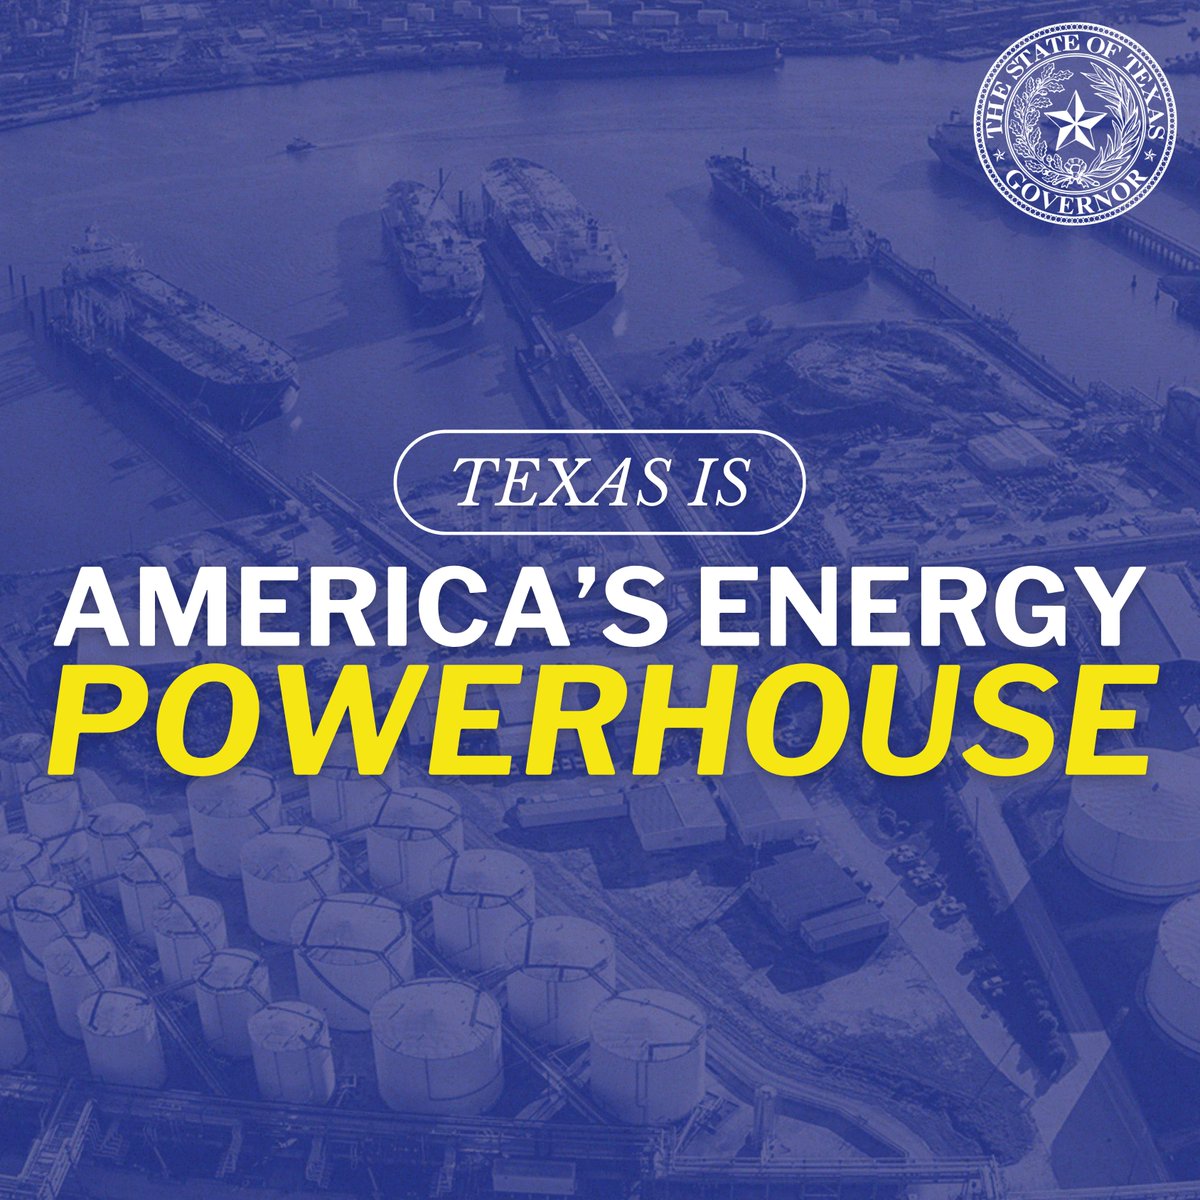 Texas is America’s energy POWERHOUSE. Our energy sources power not only our great state—they power the entire nation. 🇺🇸